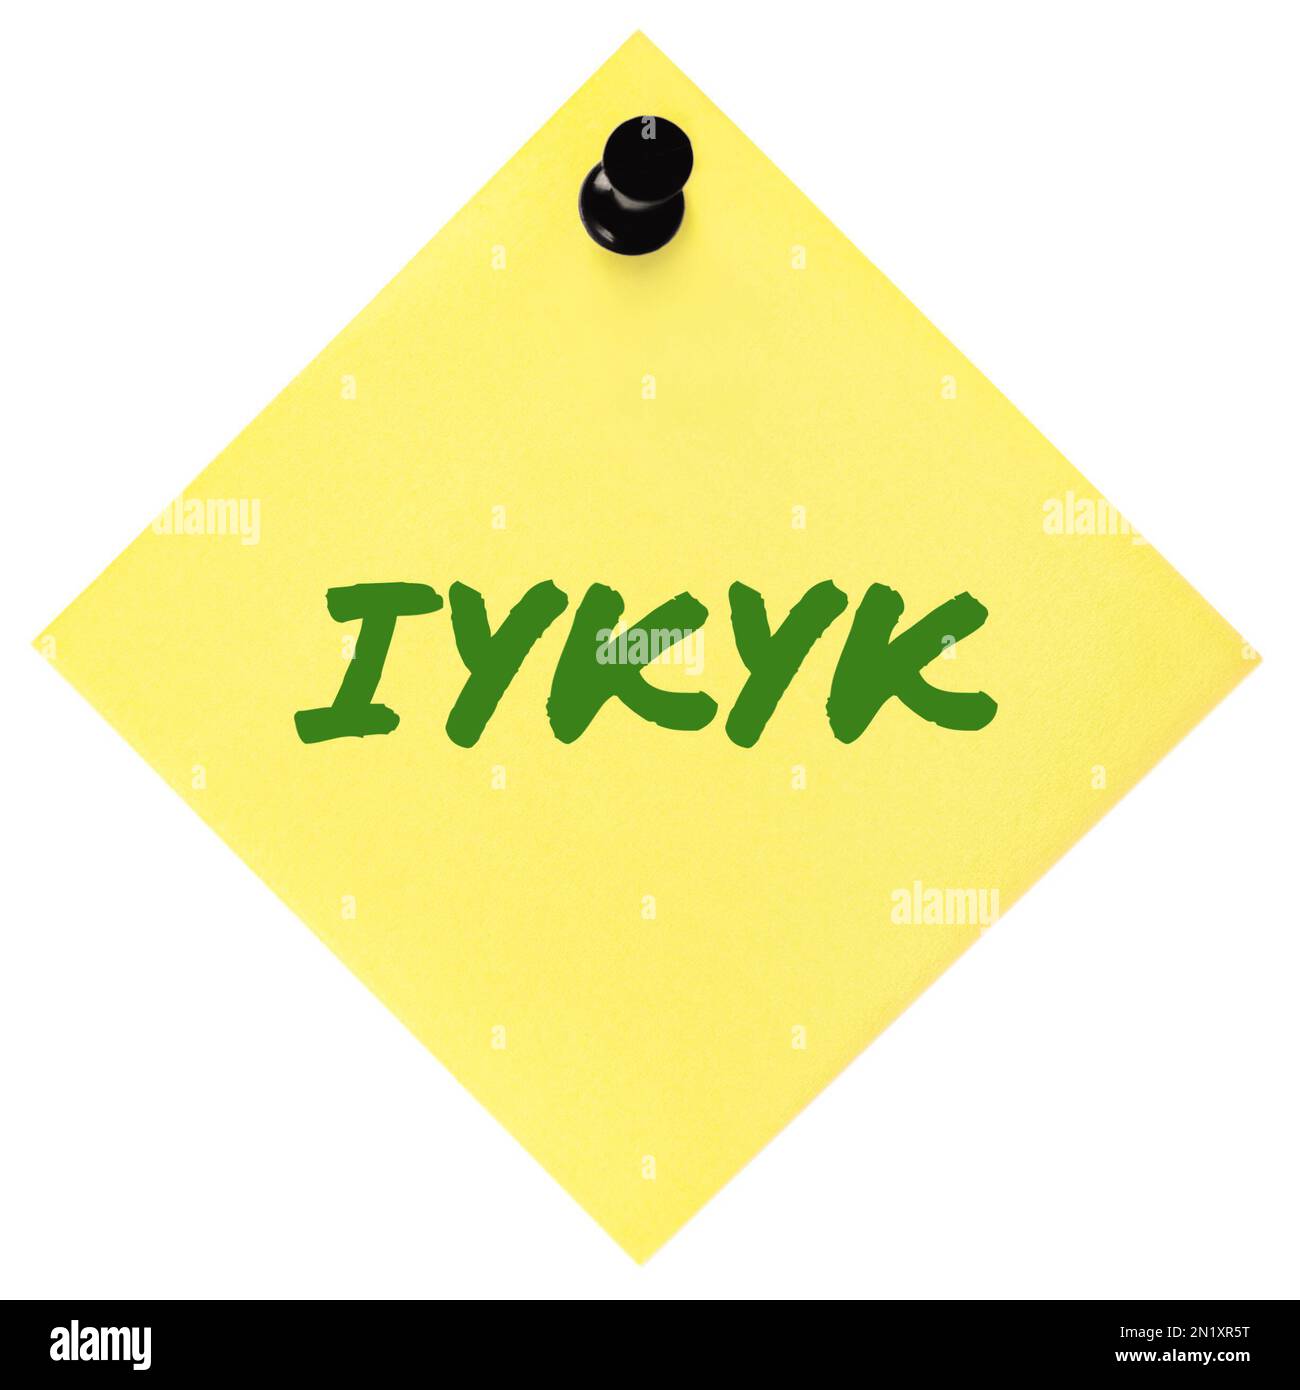 https://c8.alamy.com/comp/2N1XR5T/if-you-know-you-know-acronym-iykyk-macro-closeup-green-marker-text-tiktok-jokes-concept-isolated-yellow-adhesive-post-it-note-black-pushpin-2N1XR5T.jpg